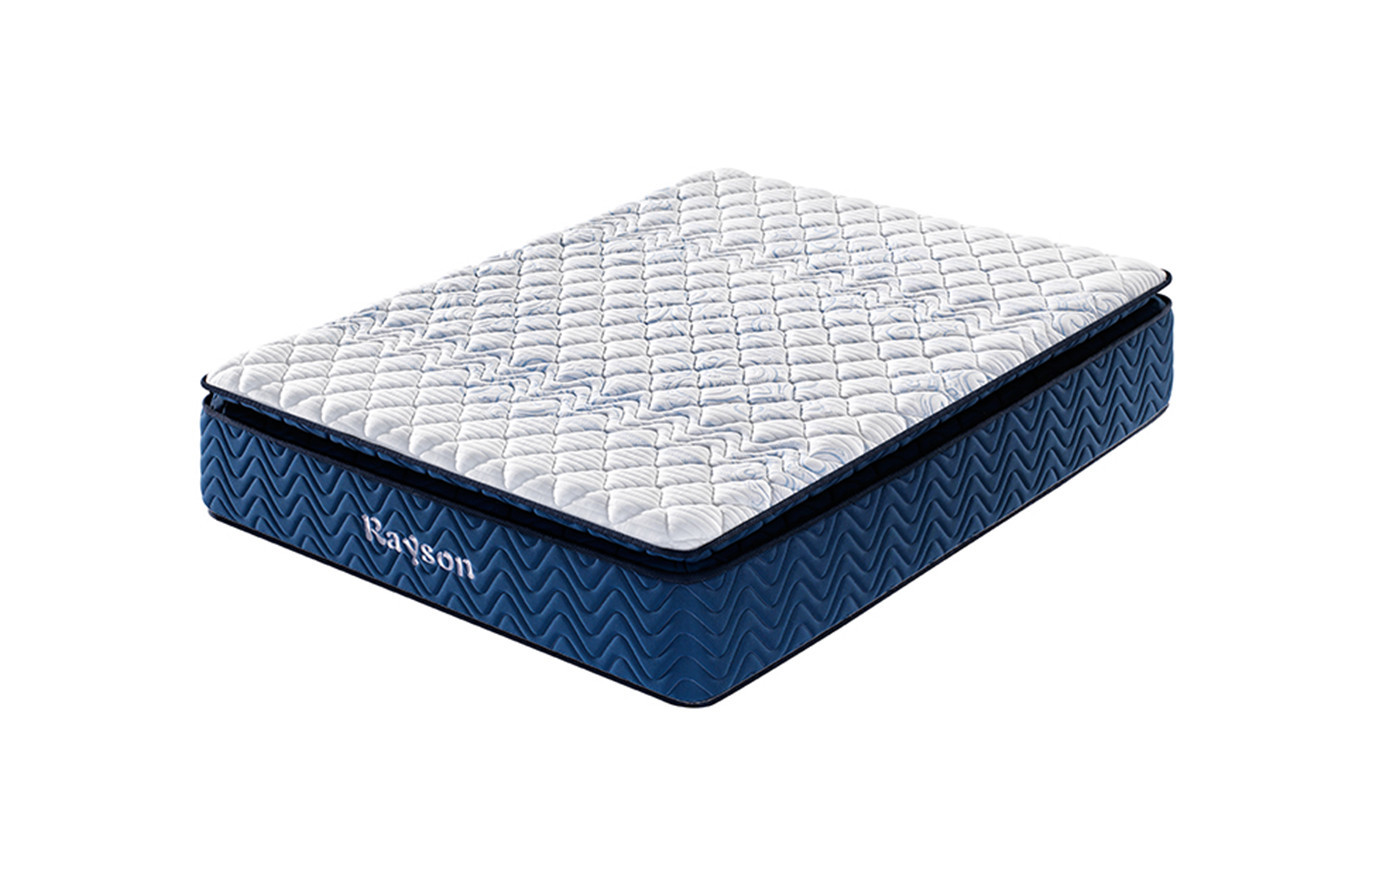 36cm height 5 star hotel mattress brand customized at discount Synwin